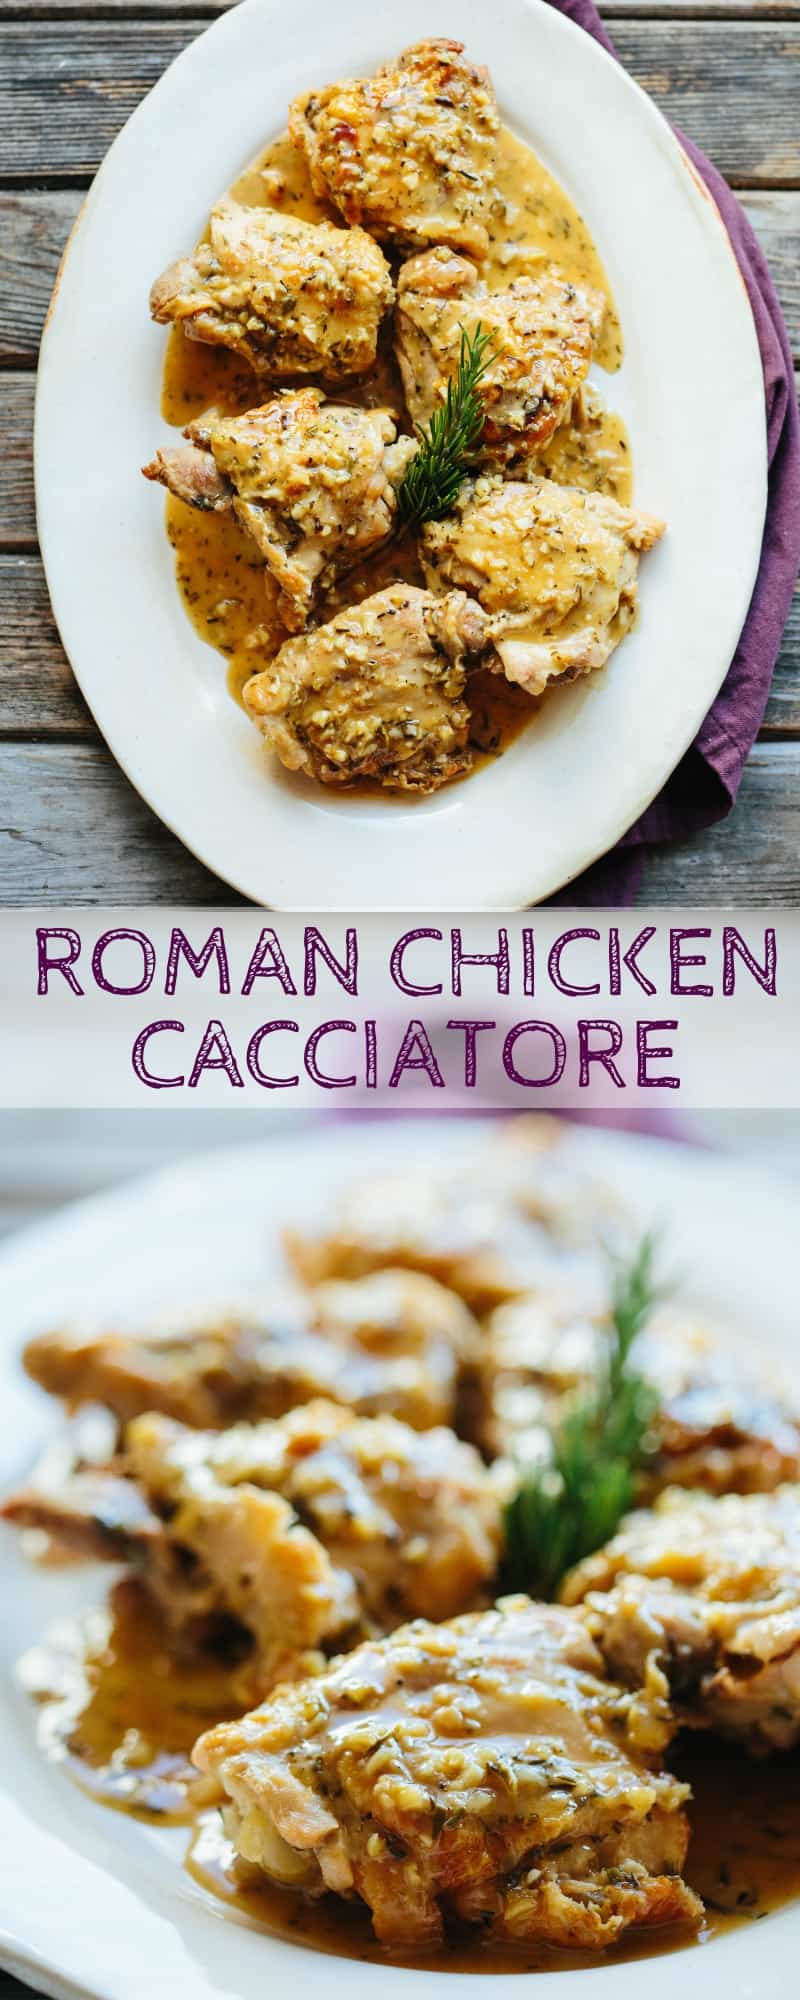 ROMAN CHICKEN CACCIATORE is made with bone-in chicken thighs slowly braised in a flavorful liquid made from white wine, vinegar, garlic and rosemary. #chicken #cacciatore #easy #recipe #roman #vinegar | ColeyCooks.com